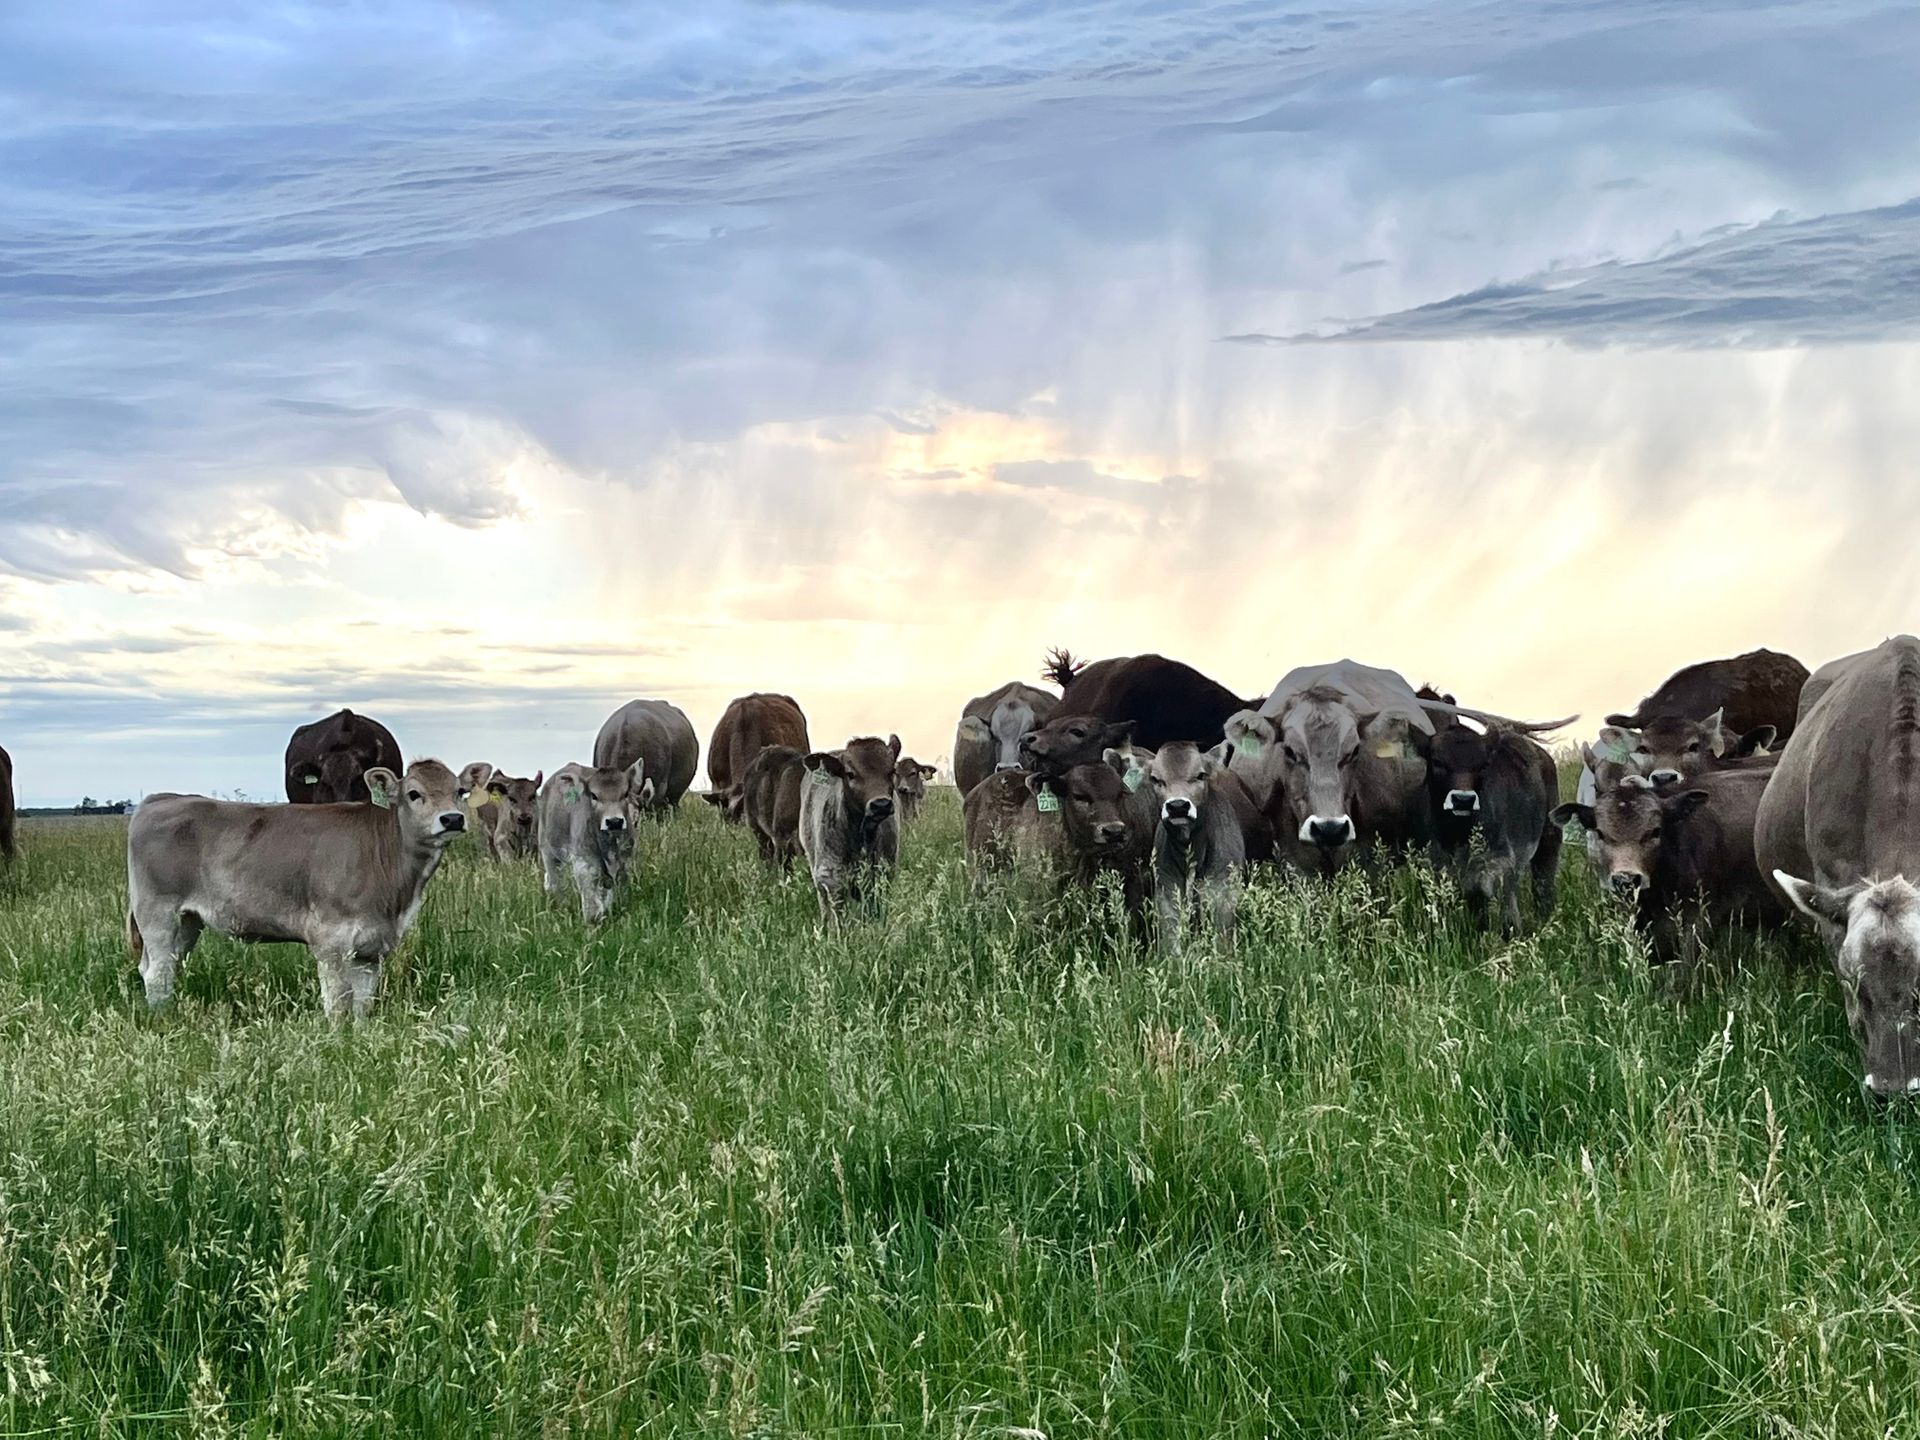 A herd of cows grazing in a grassy field.